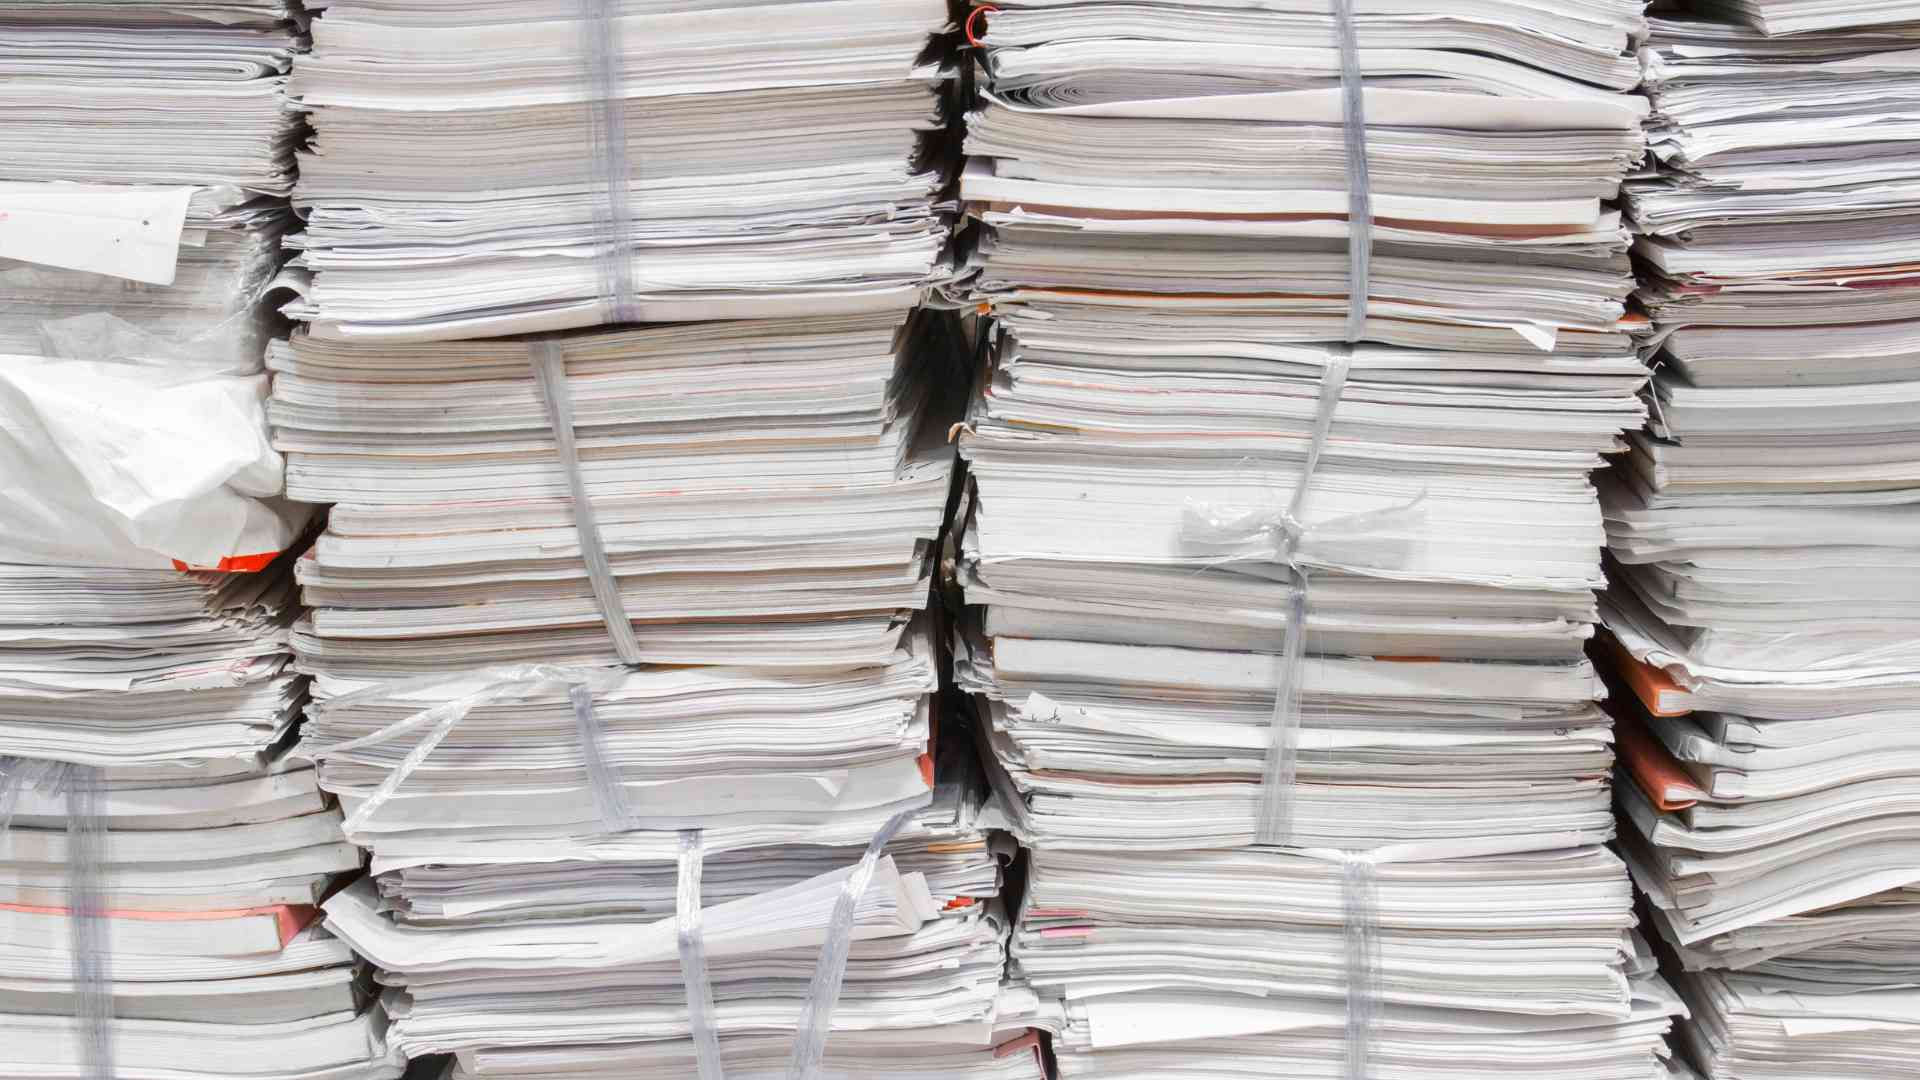 Paper Storage and Production: A Growing Concern for Governments